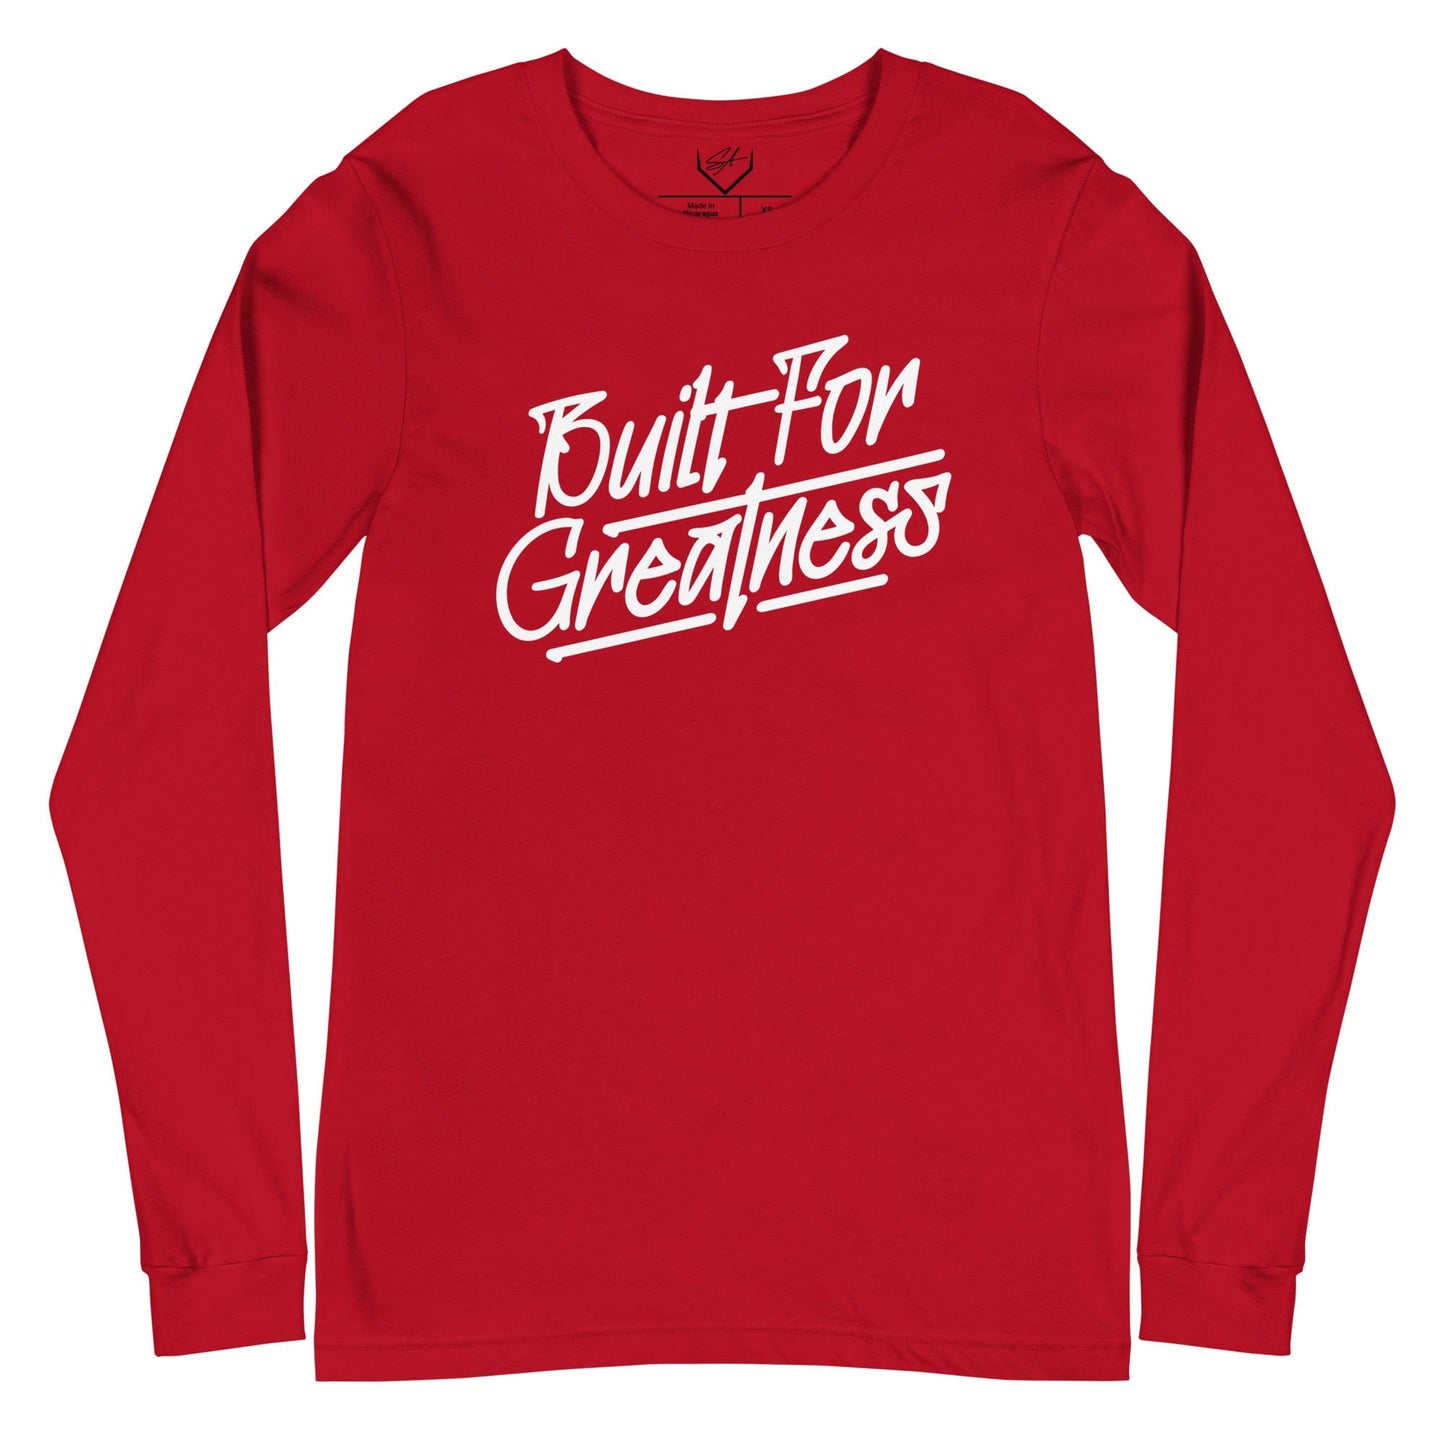 Built For Greatness - Adult Long Sleeve